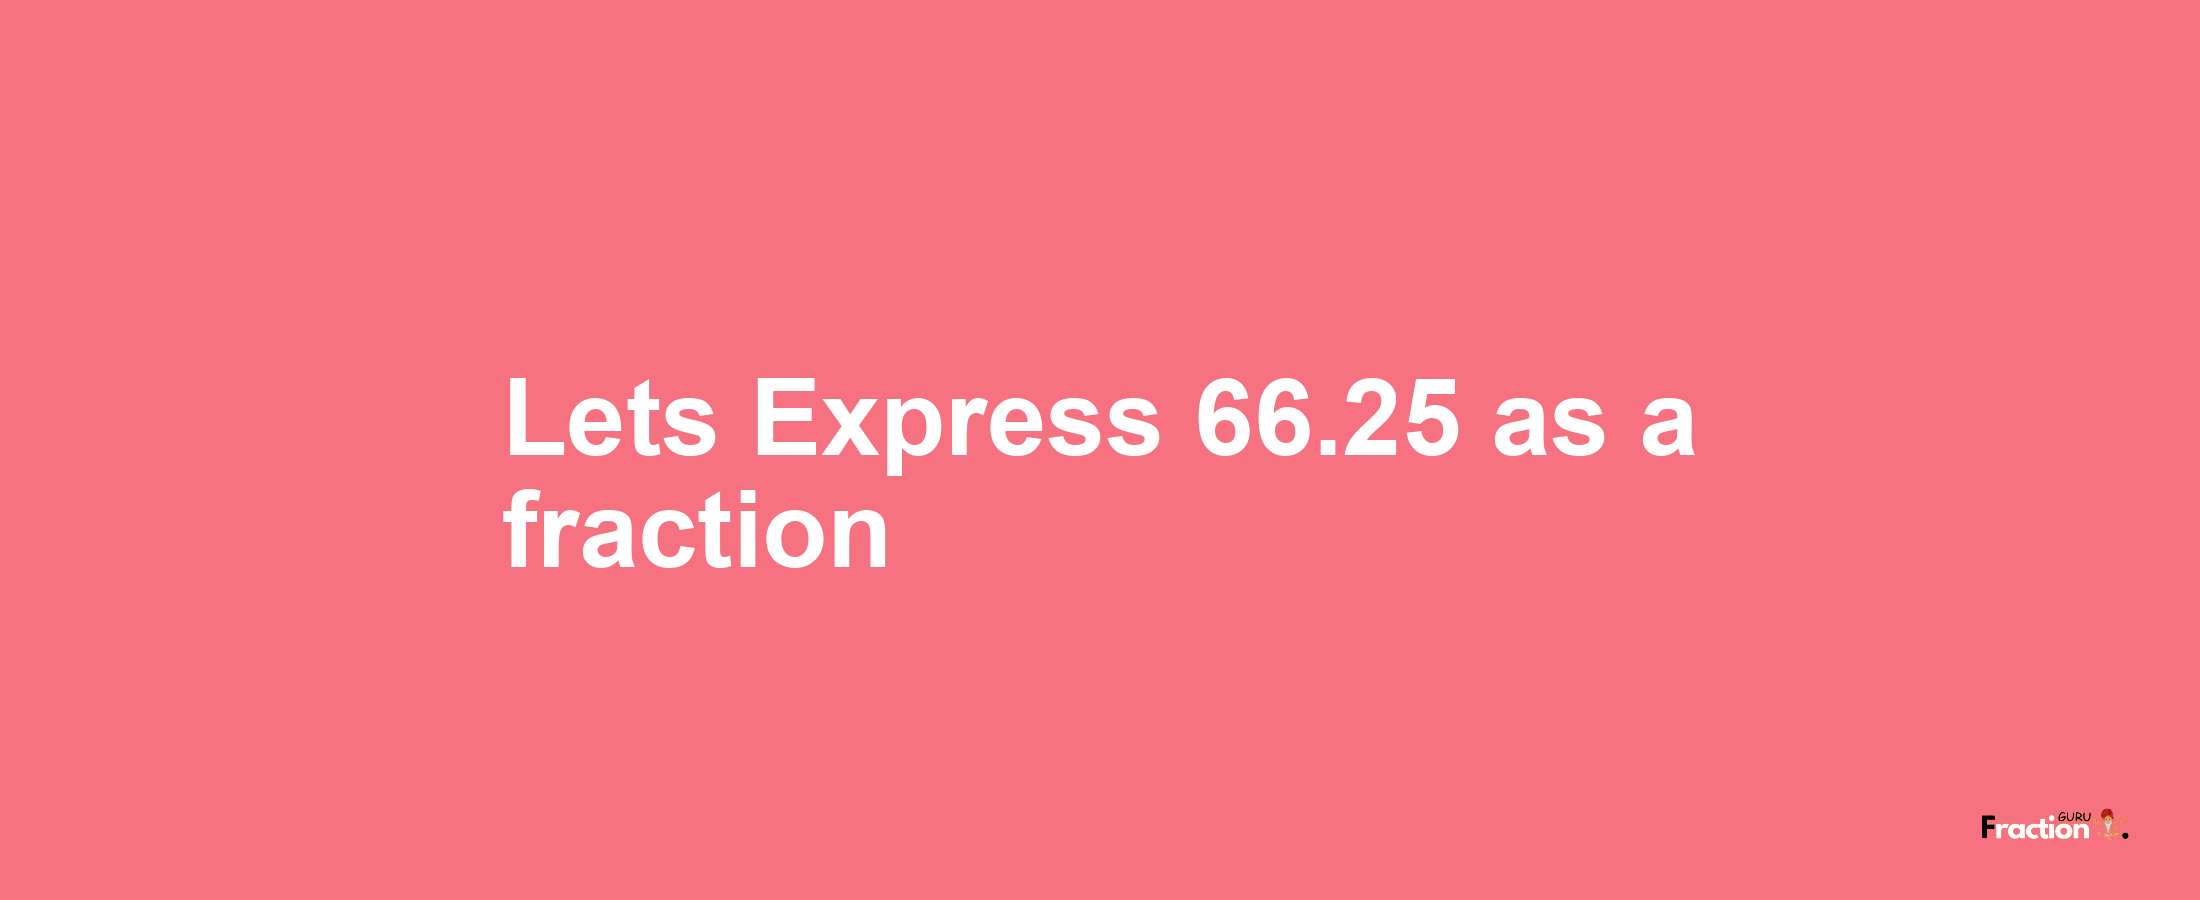 Lets Express 66.25 as afraction